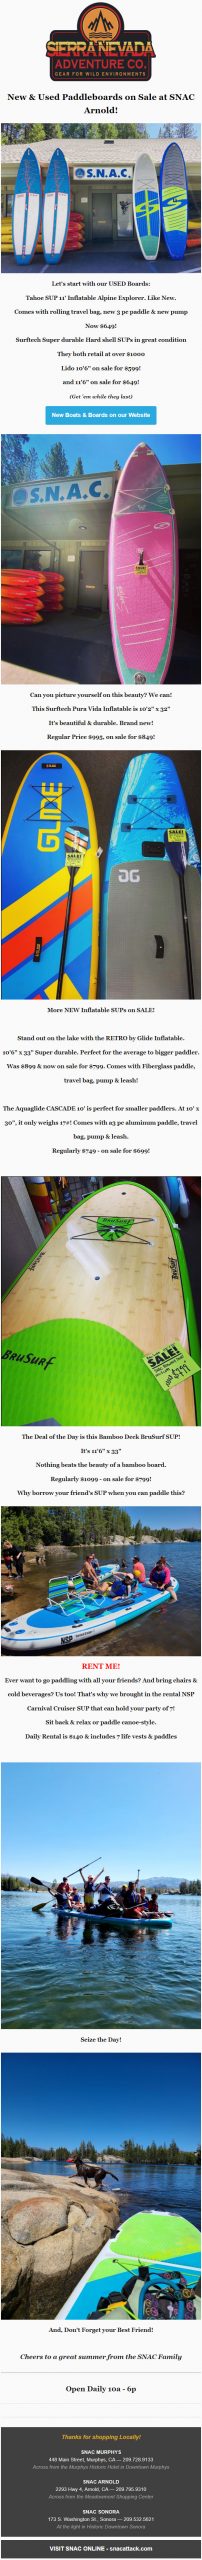 New & Used Paddleboards on Sale at SNAC Arnold!